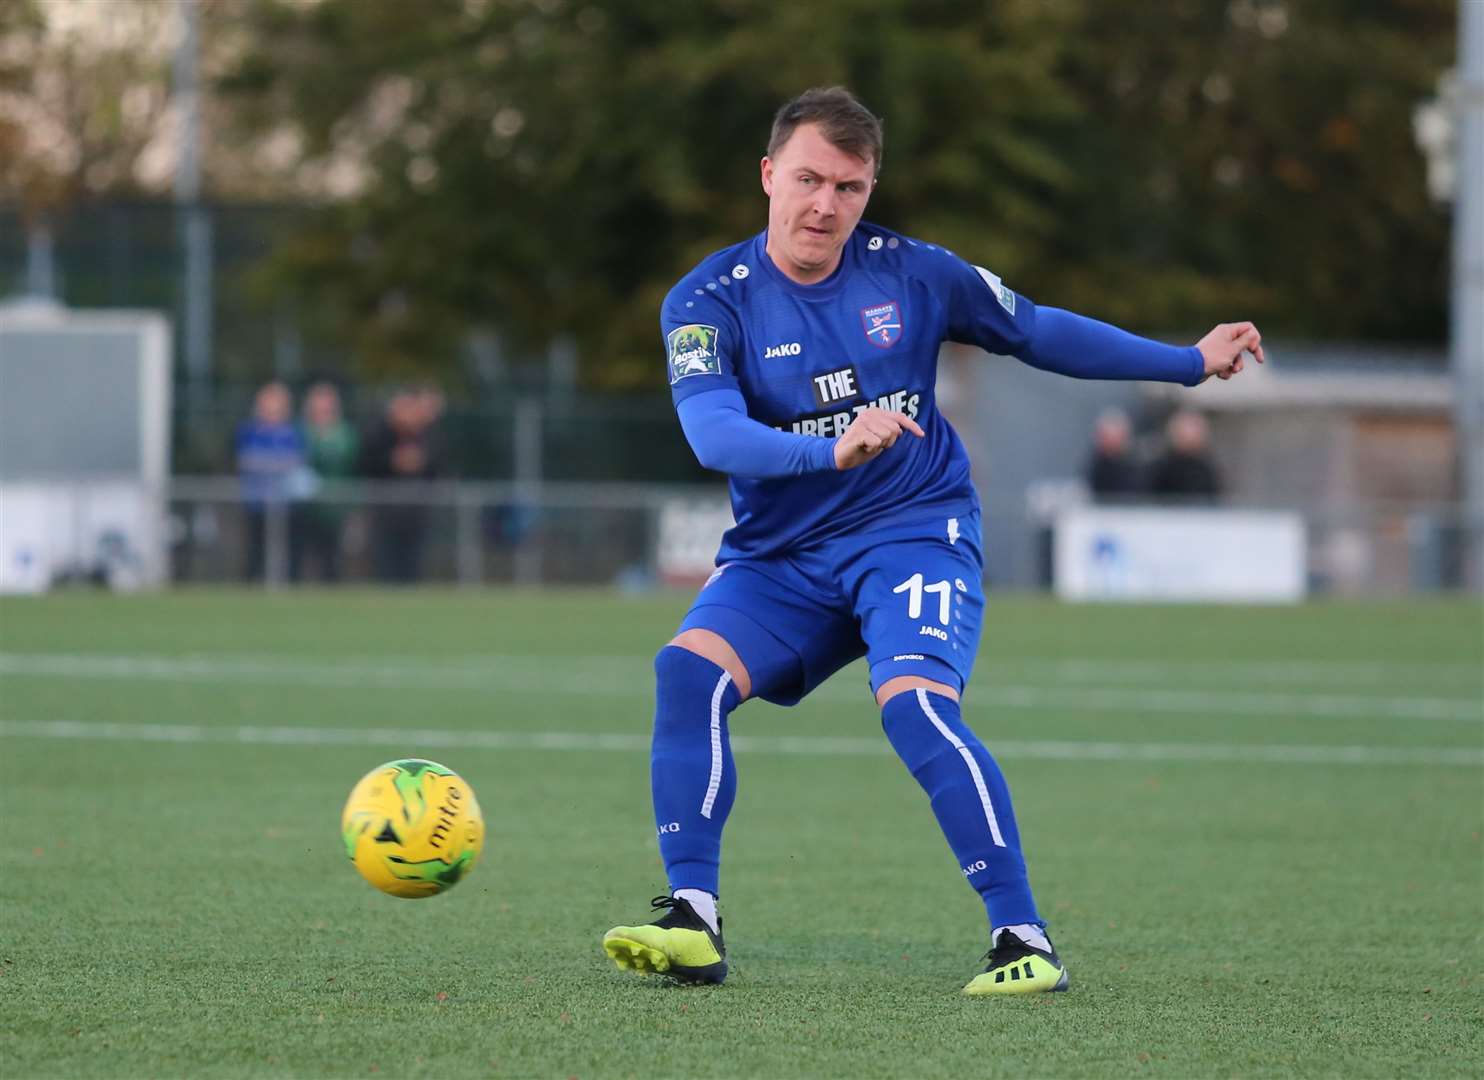 Alex Flisher joined Margate after leaving Maidstone in 2017